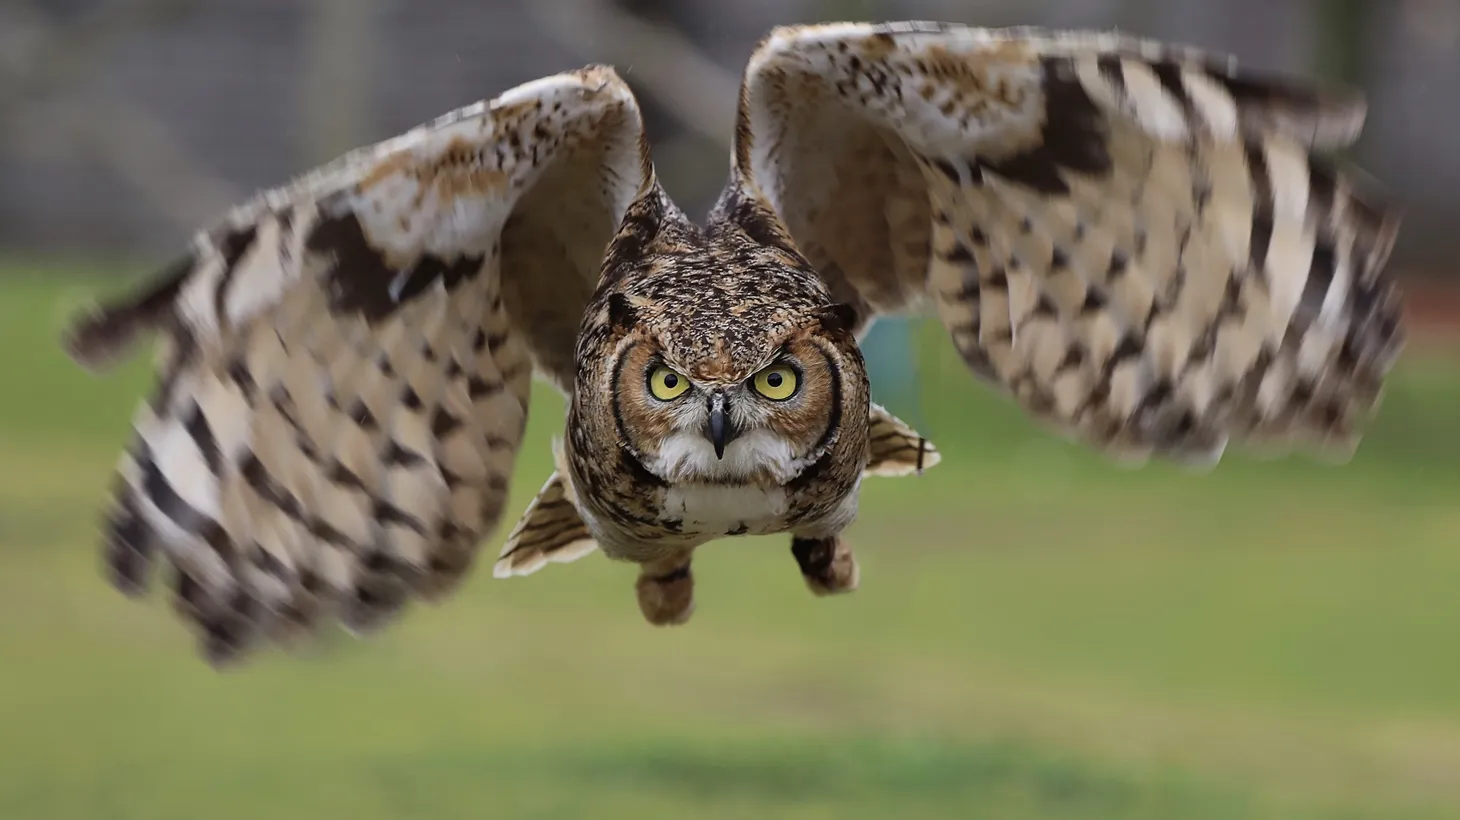 The great horned owl is Southern California’s most common owl species, and spotting one is a rare delight.